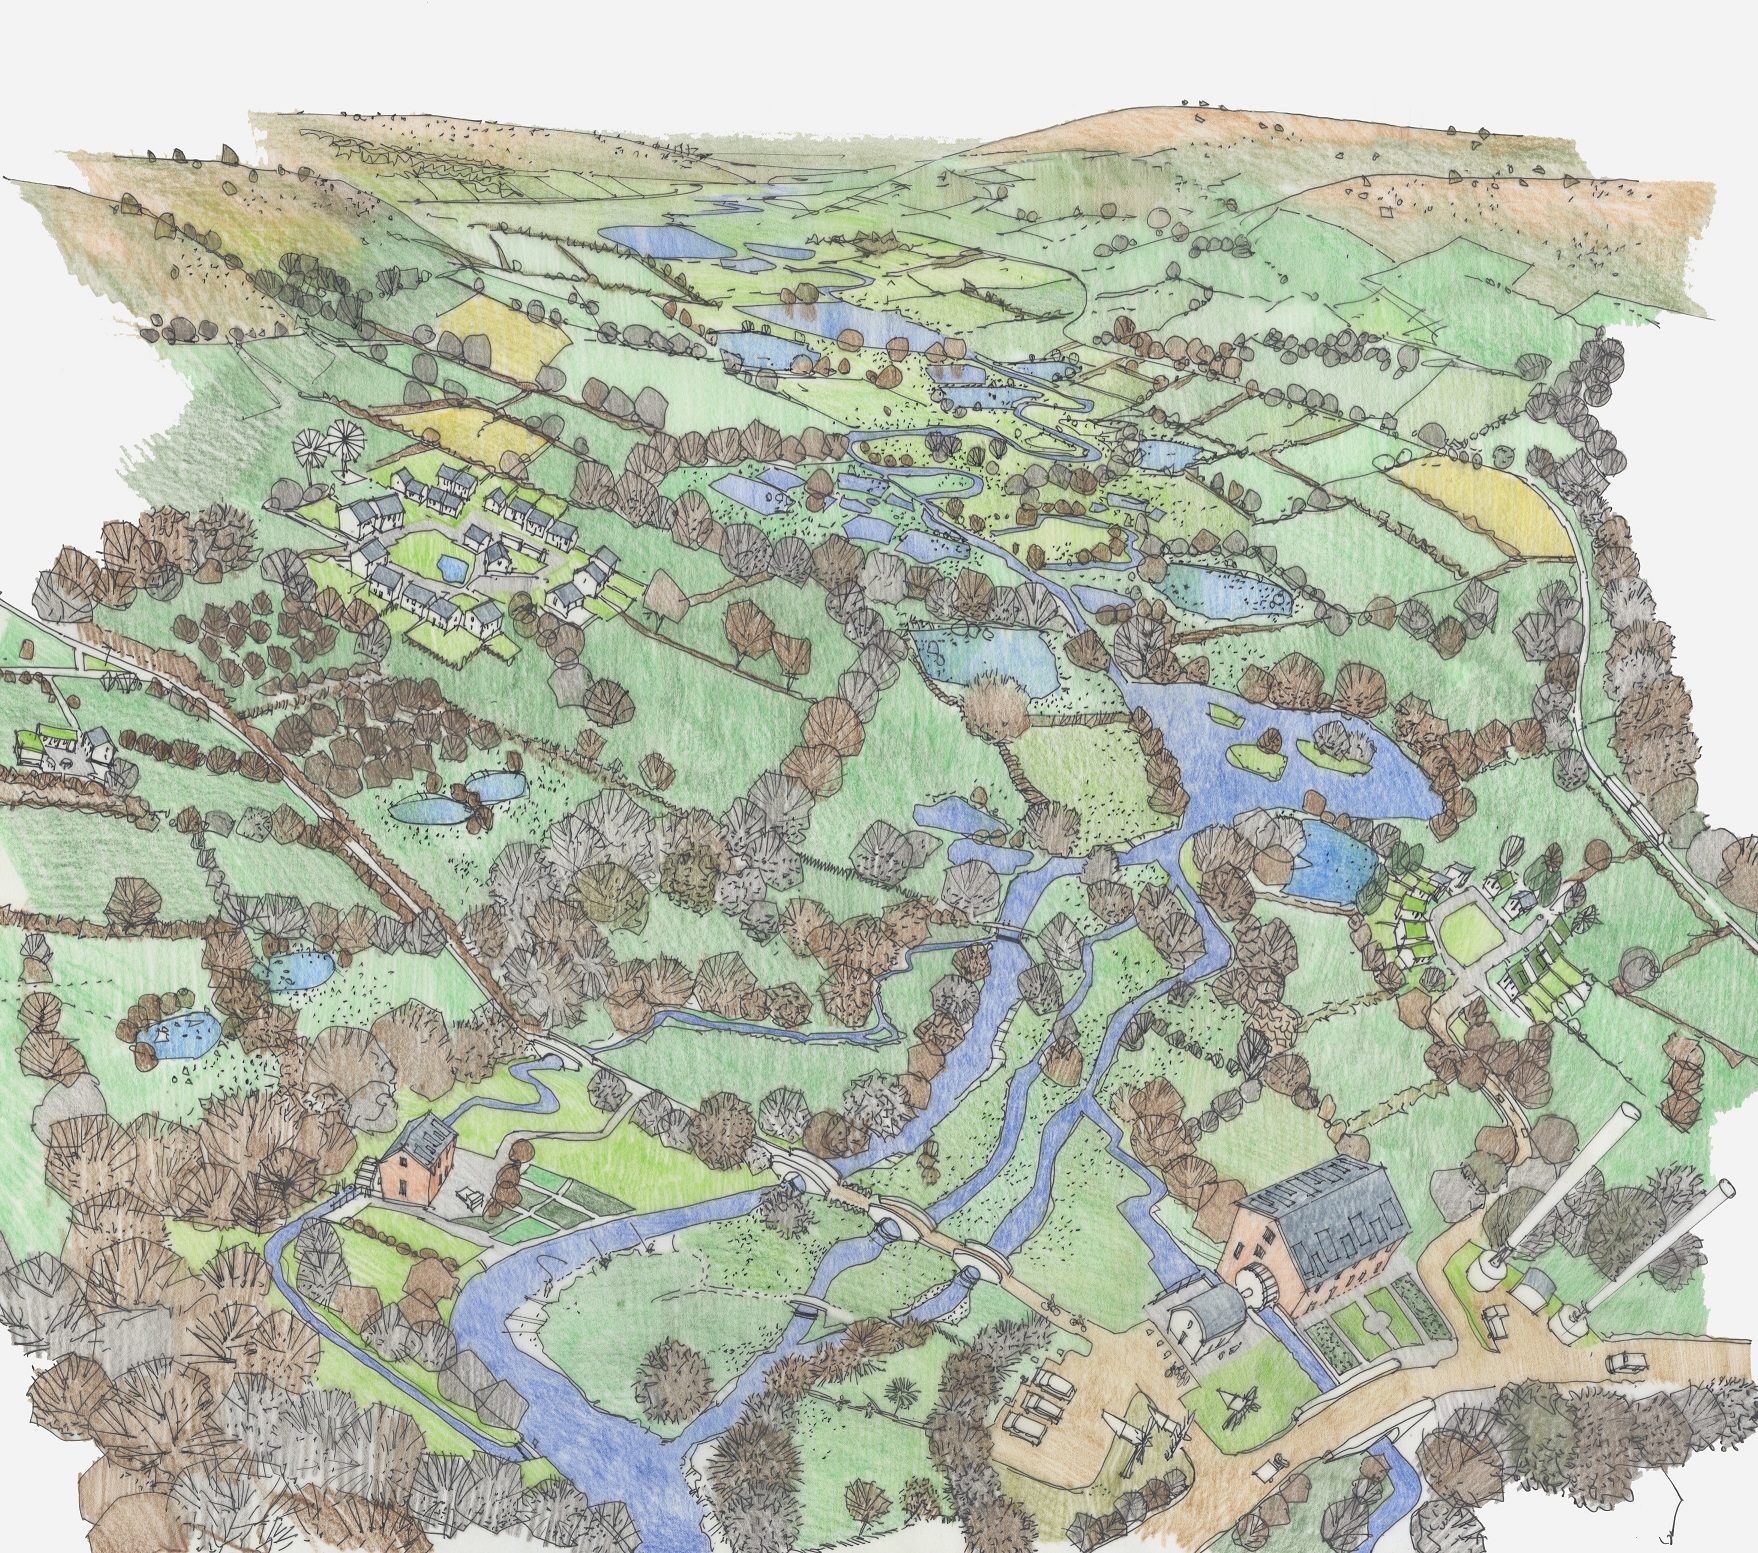 An illustration envisaging a future for the River Culm in winter